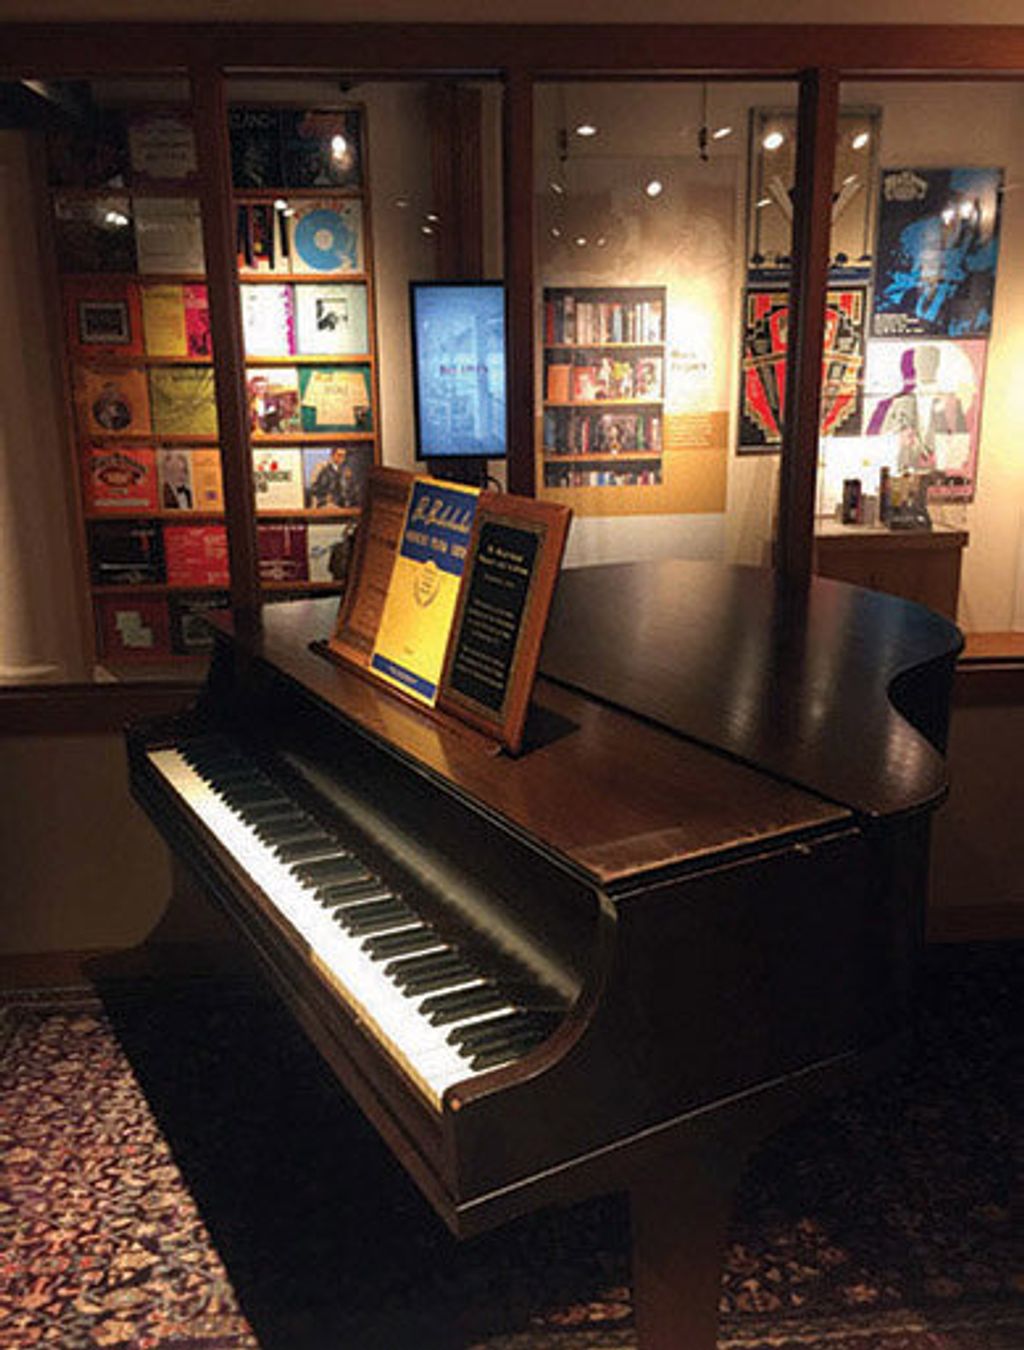 Bix Beiderbecke Museum and Archives